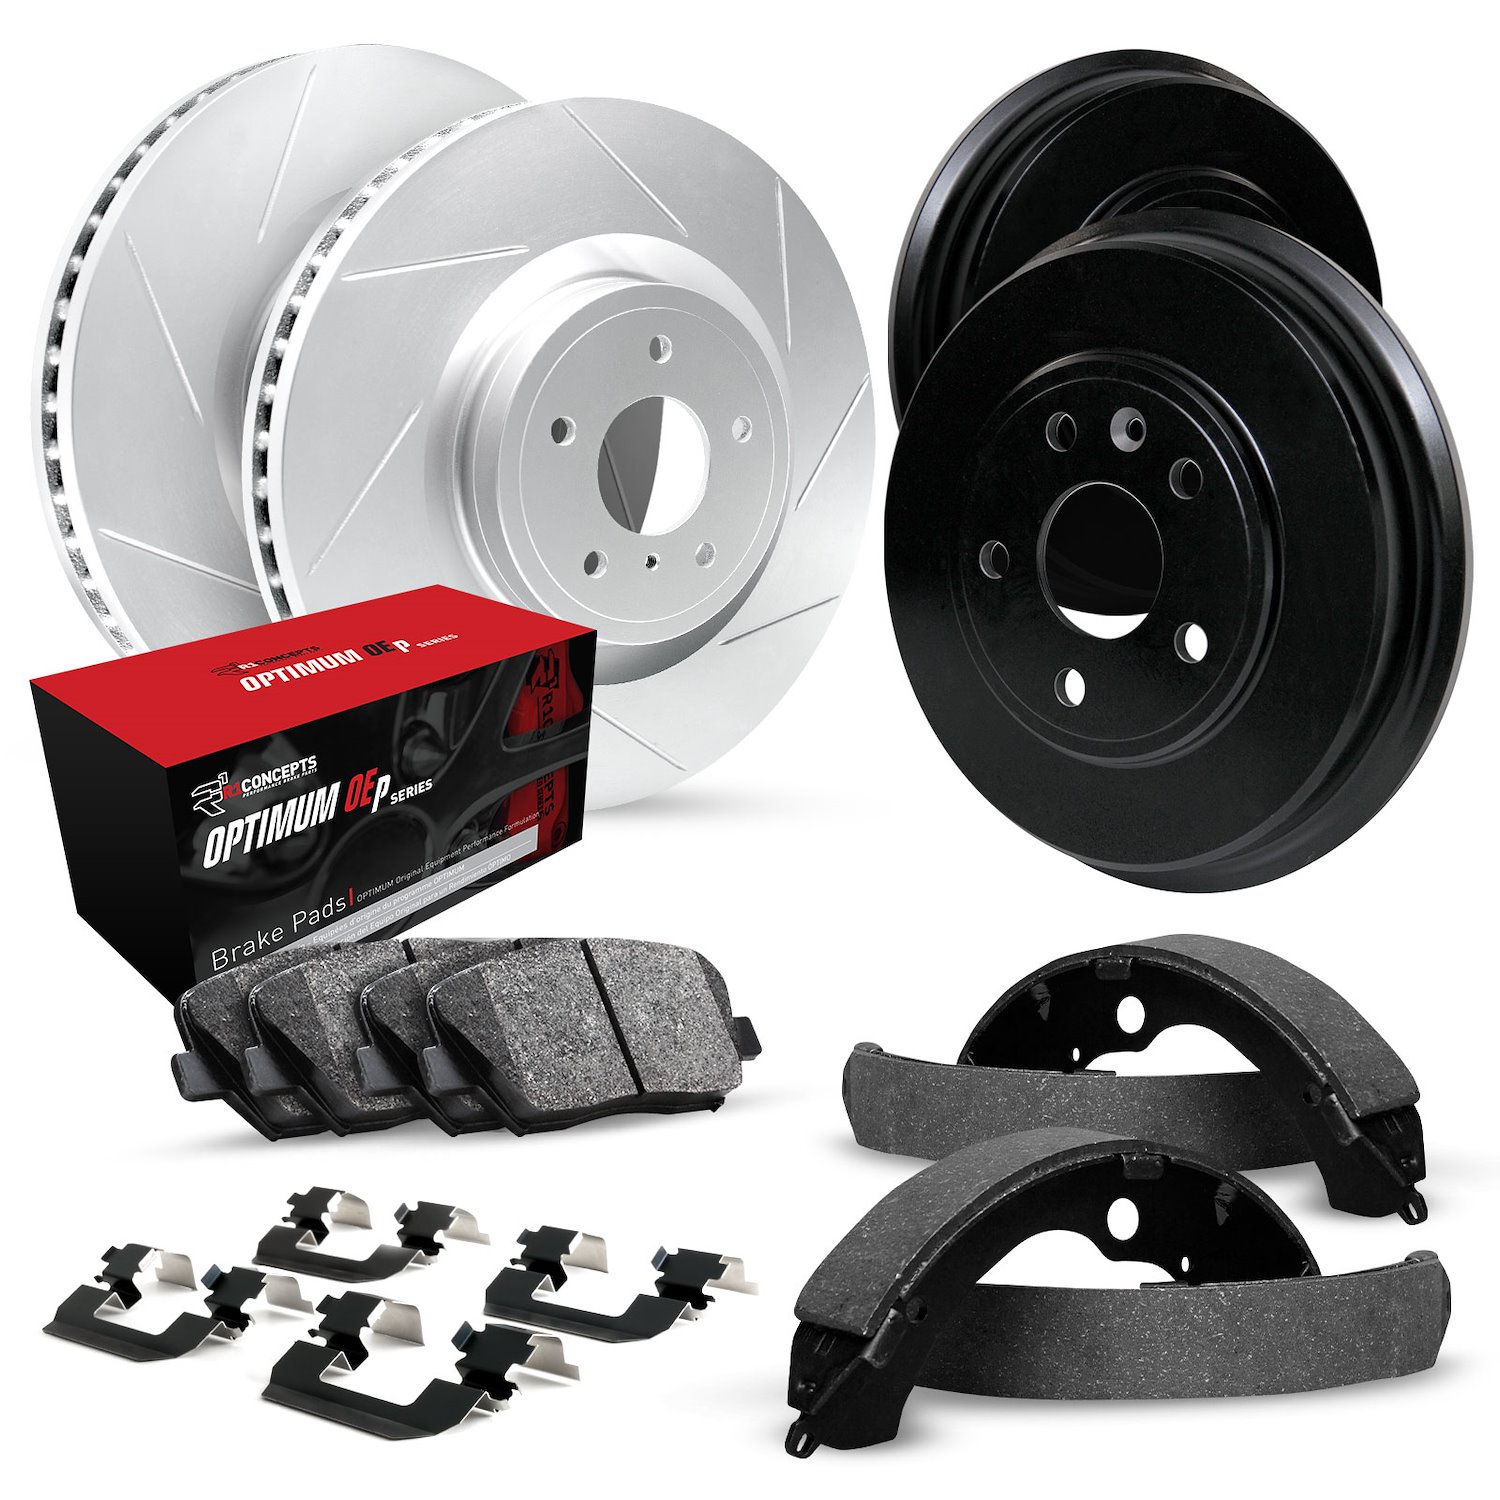 GEO-Carbon Slotted Brake Rotor & Drum Set w/Optimum OE Pads, Shoes, & Hardware, 1976-1985 Ford/Lincoln/Mercury/Mazda